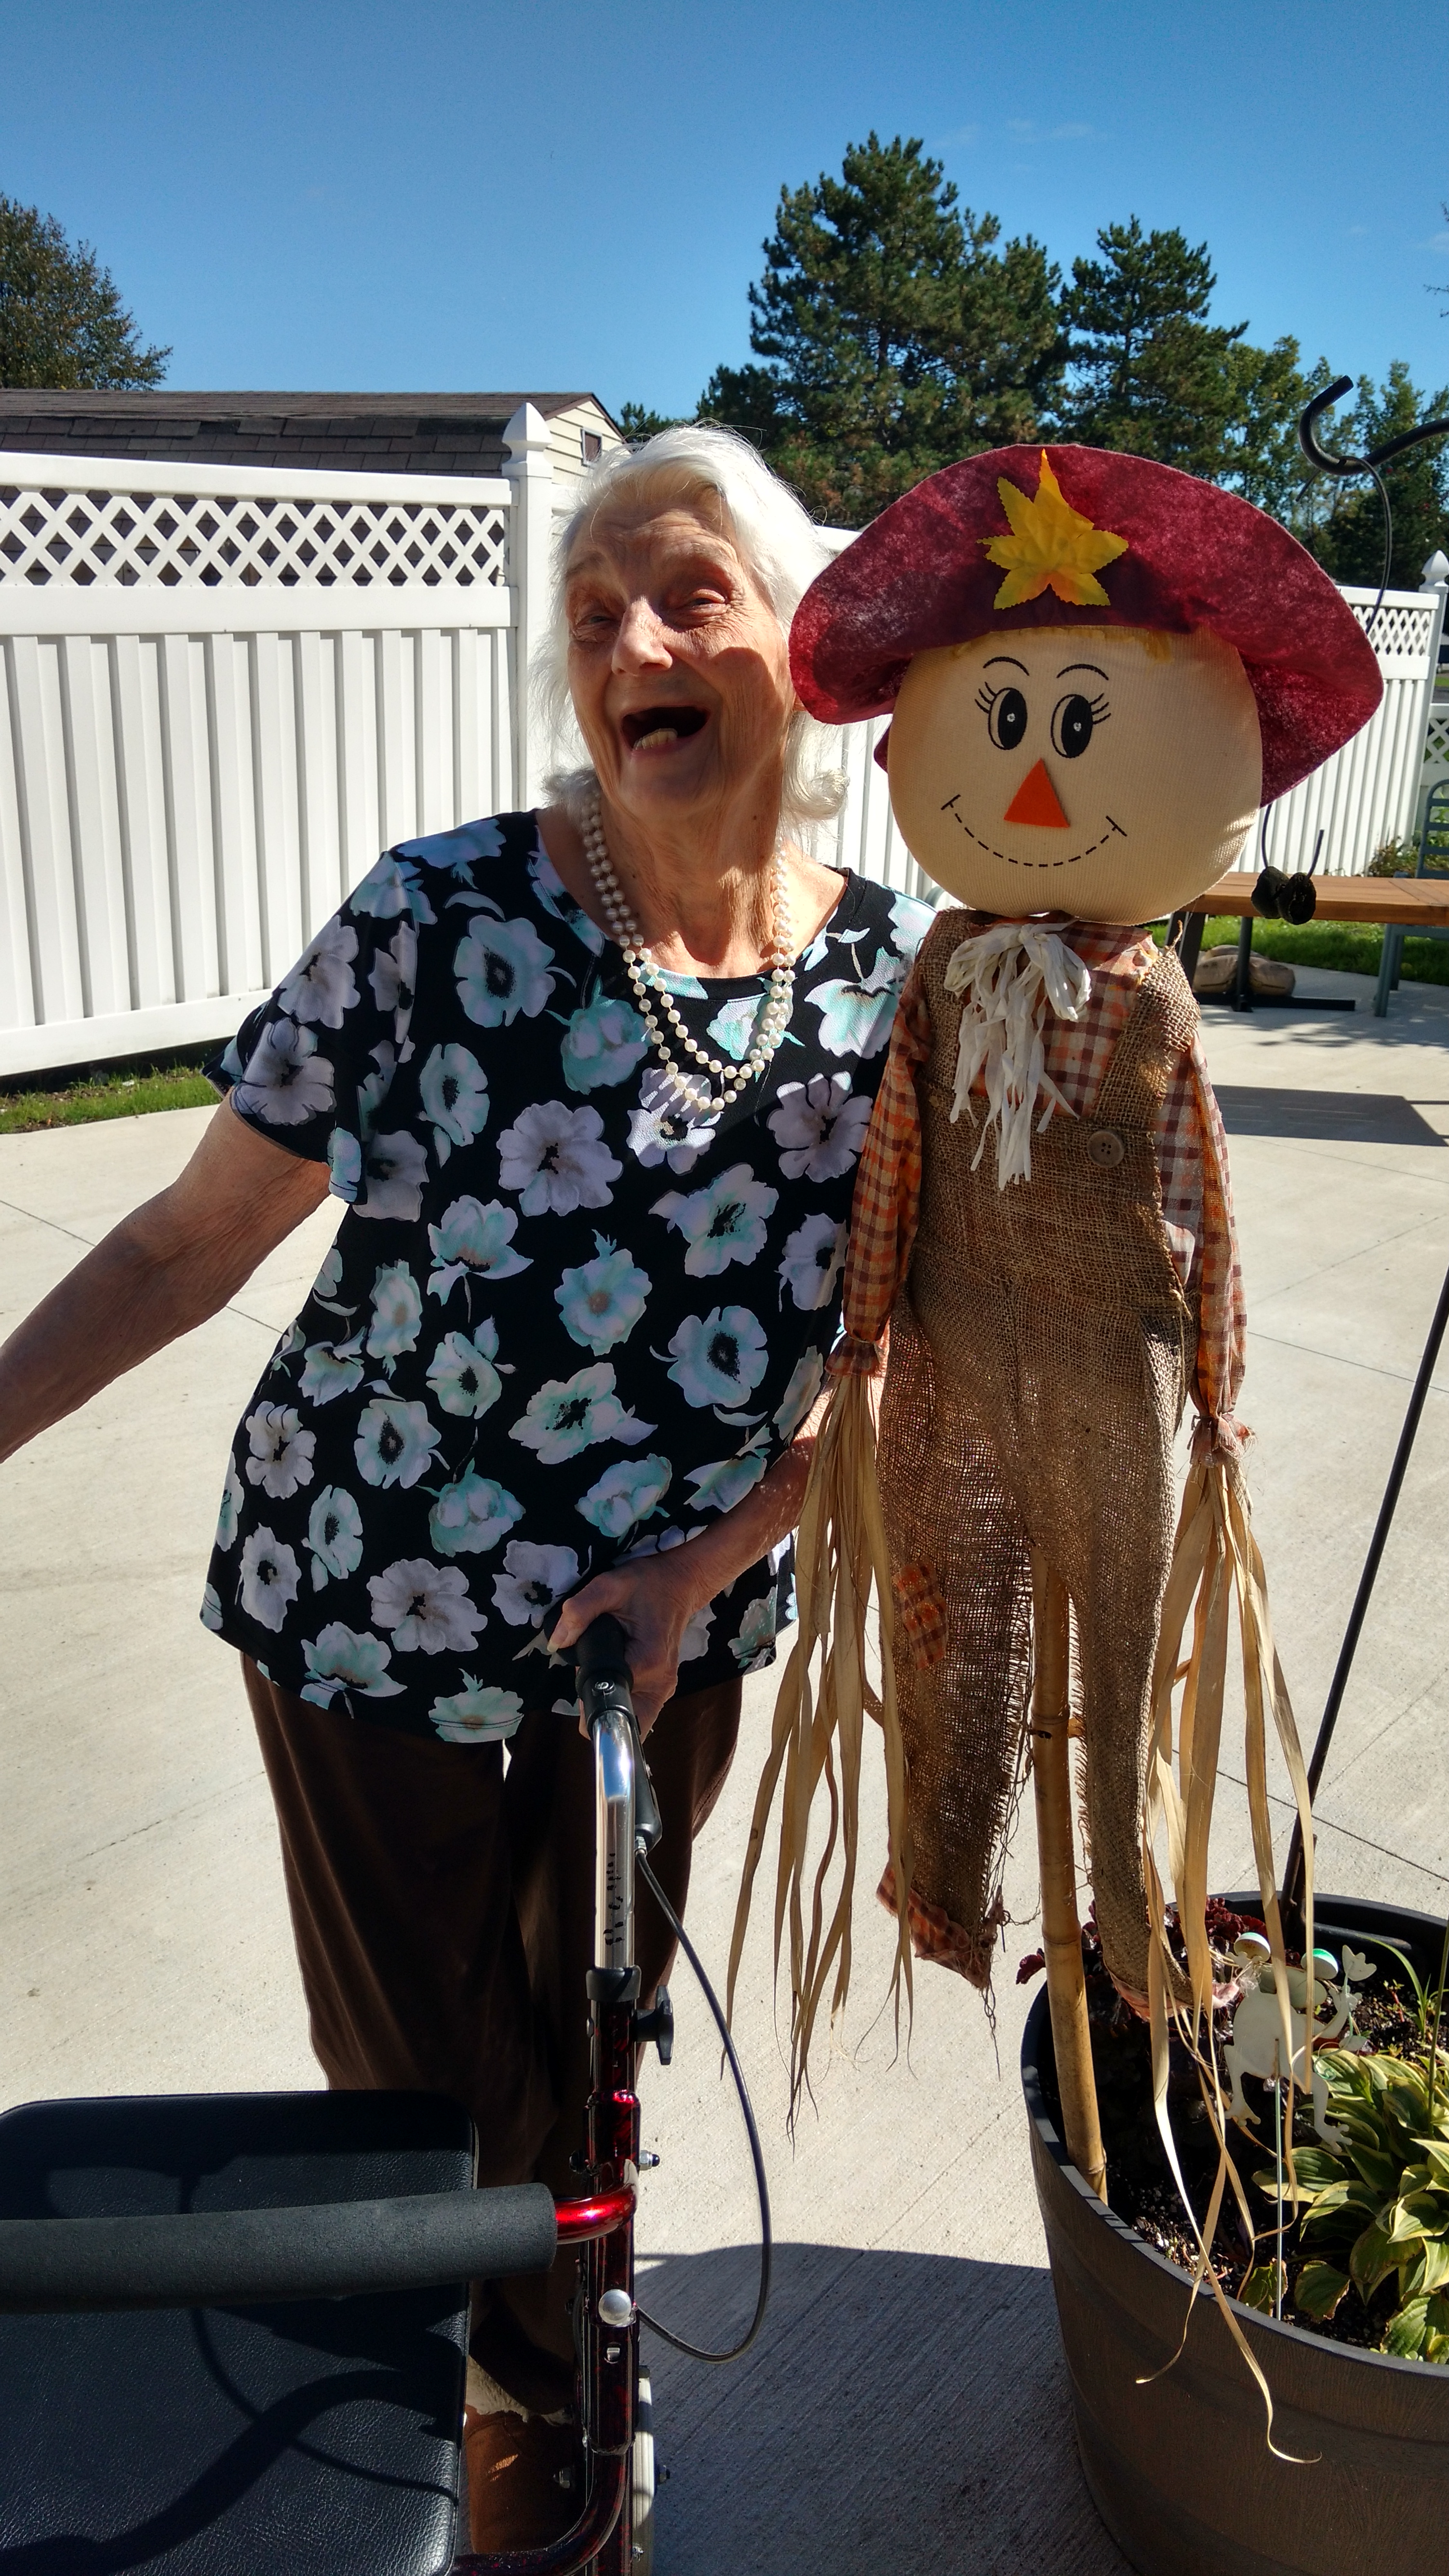 resident smiling next to a scarecrow decoration